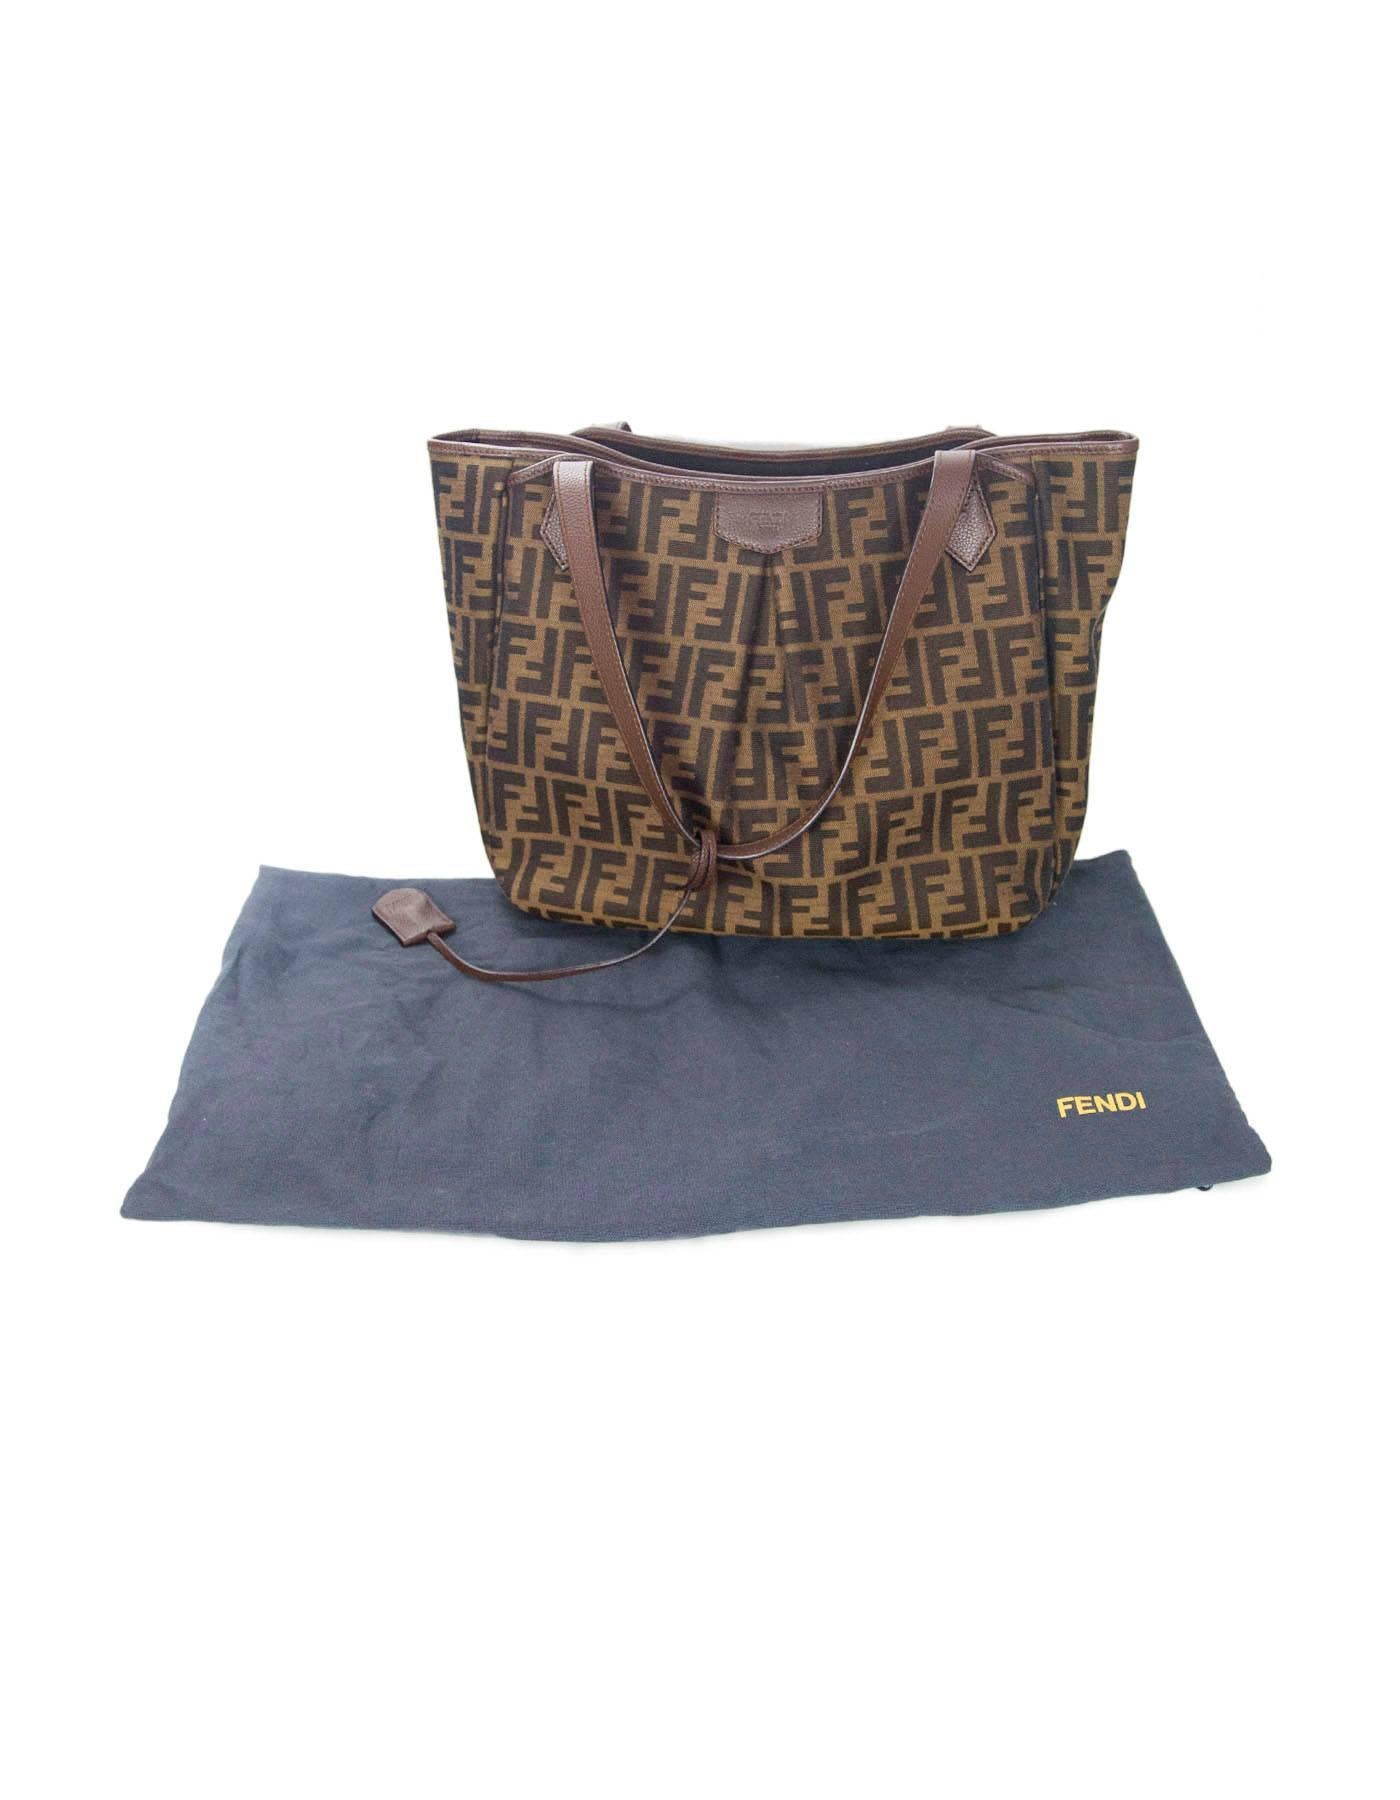 Fendi Canvas Zucca Print Tote Bag With Clochette And Dust Bag 2